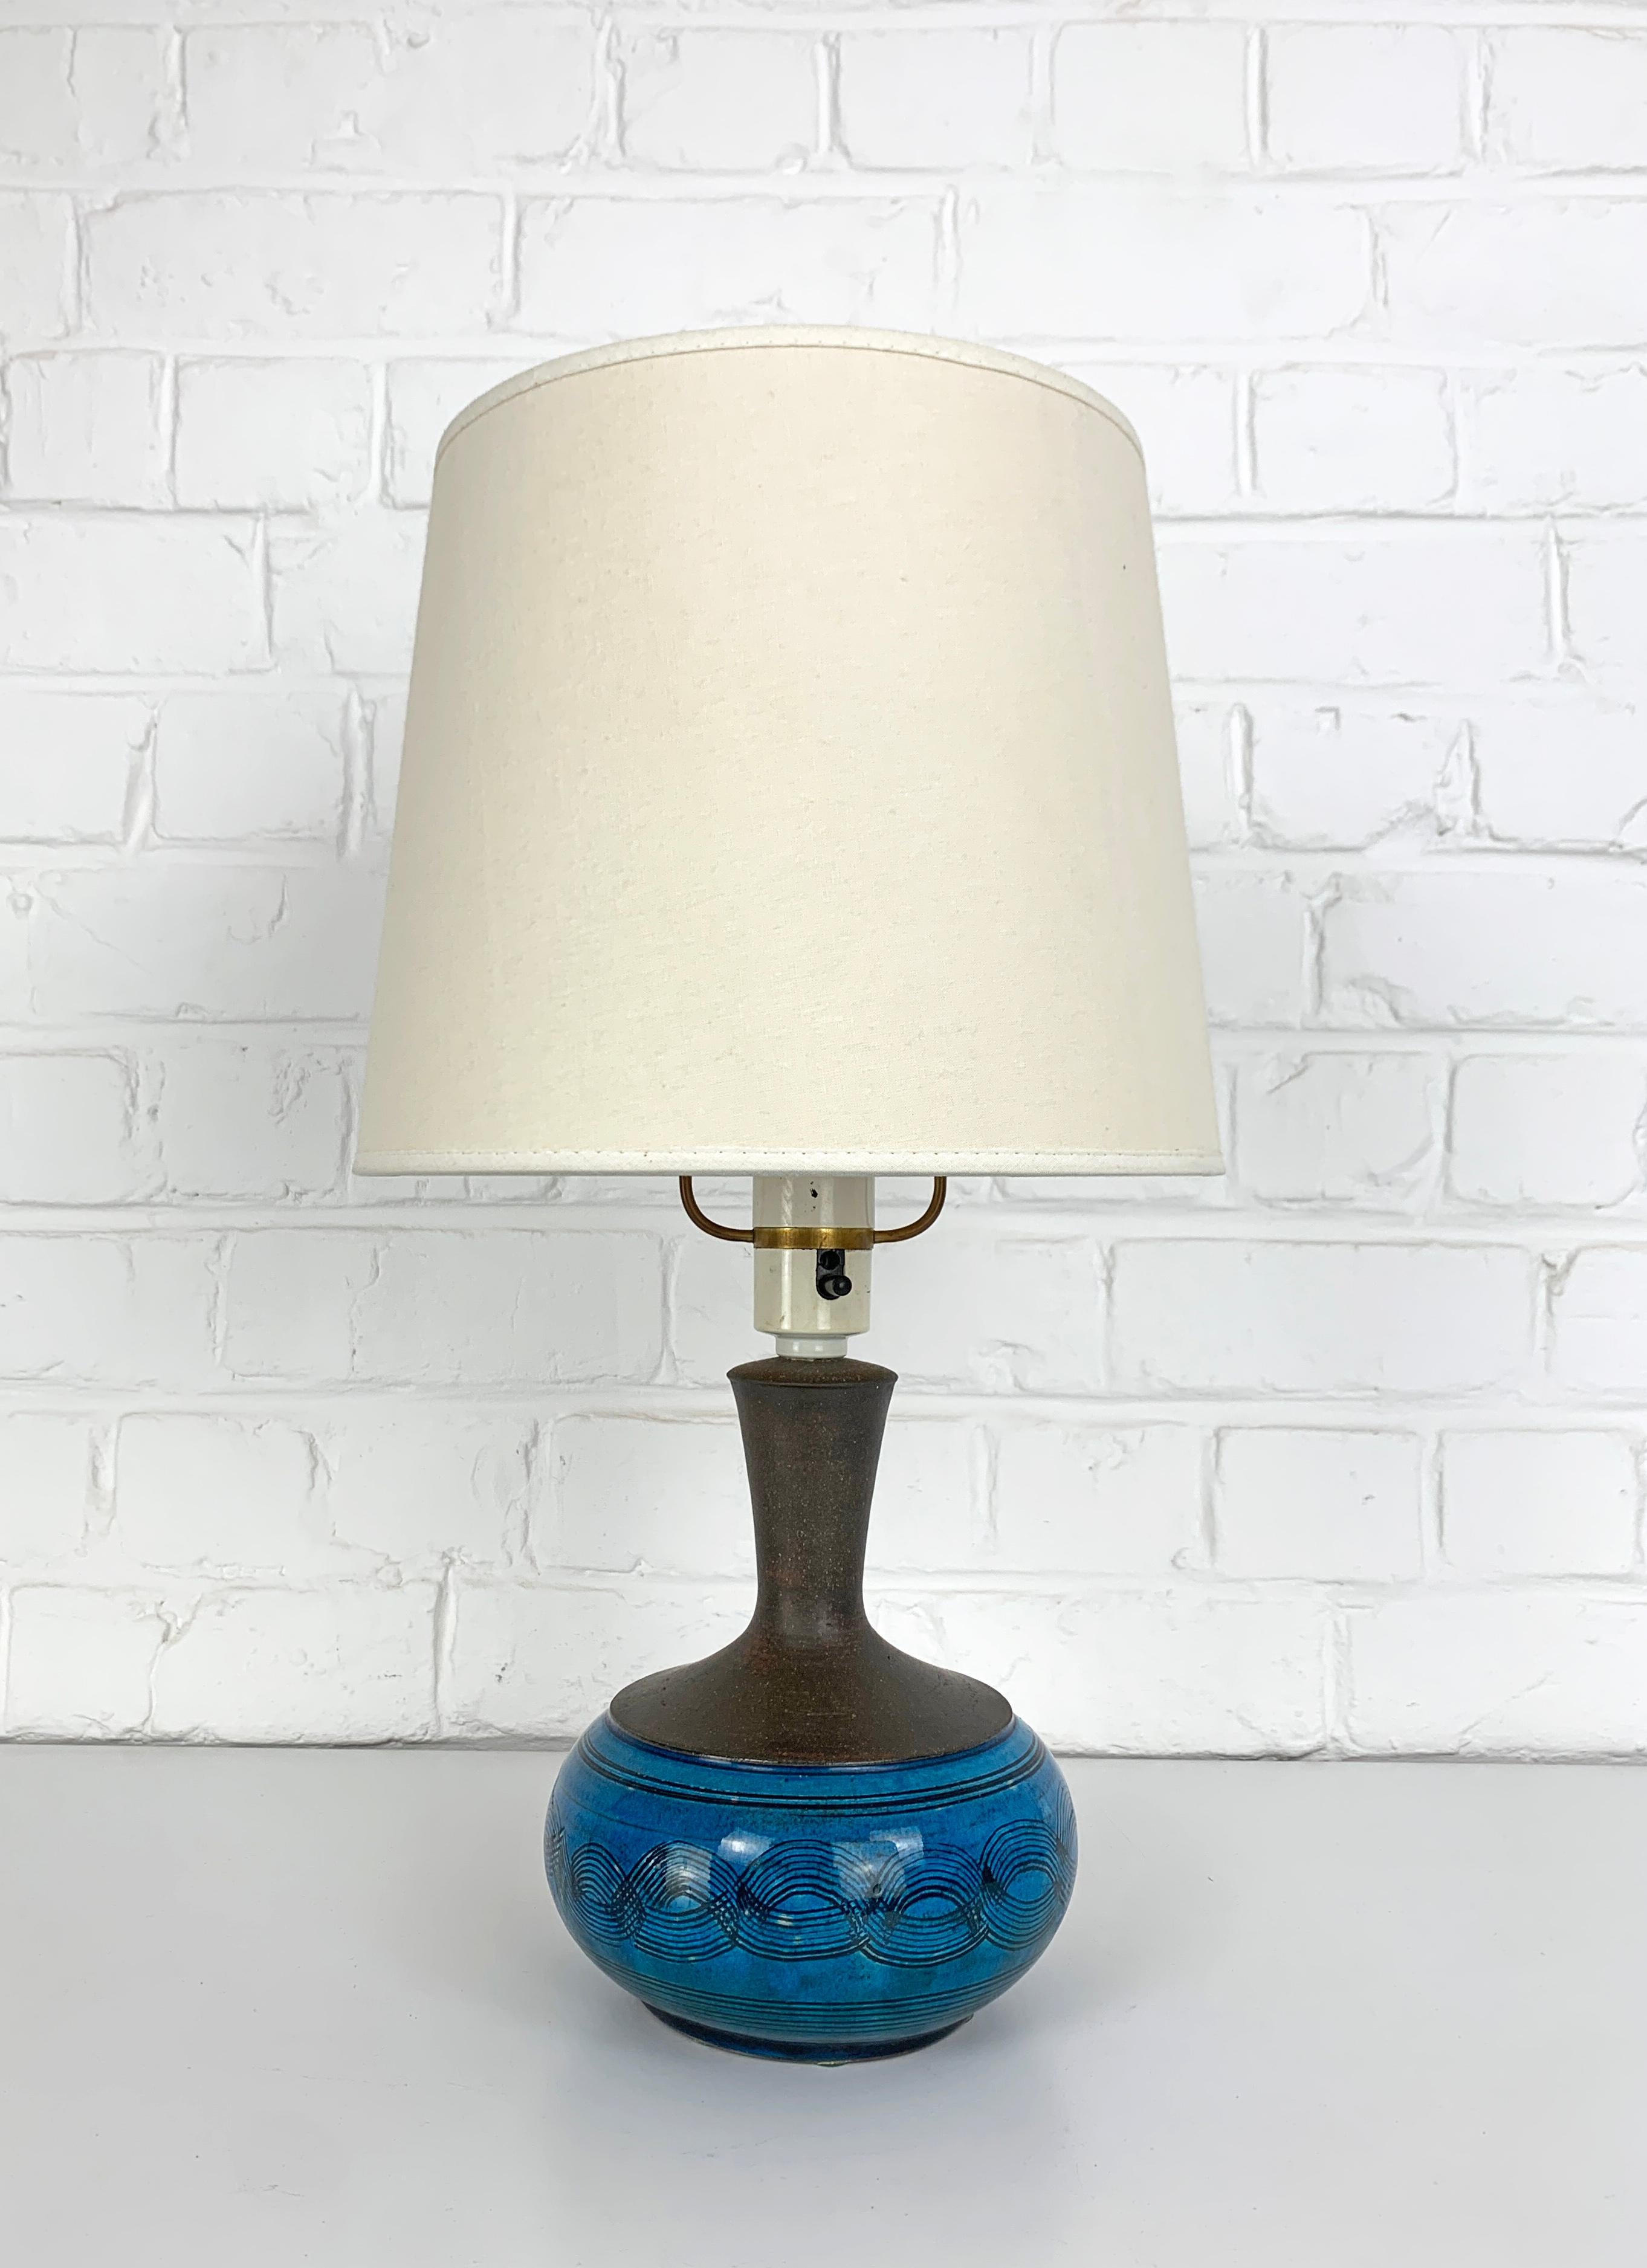 Stoneware table lamp in blue glaze and brown natural stoneware finish. Designed by Nils Kähler in the 1960s or 1970s. 

Manufactured in the workshop of Herman A. Kähler Ceramic (HAK) in the town of Naestved in southern Denmark.

Nils Kähler was the